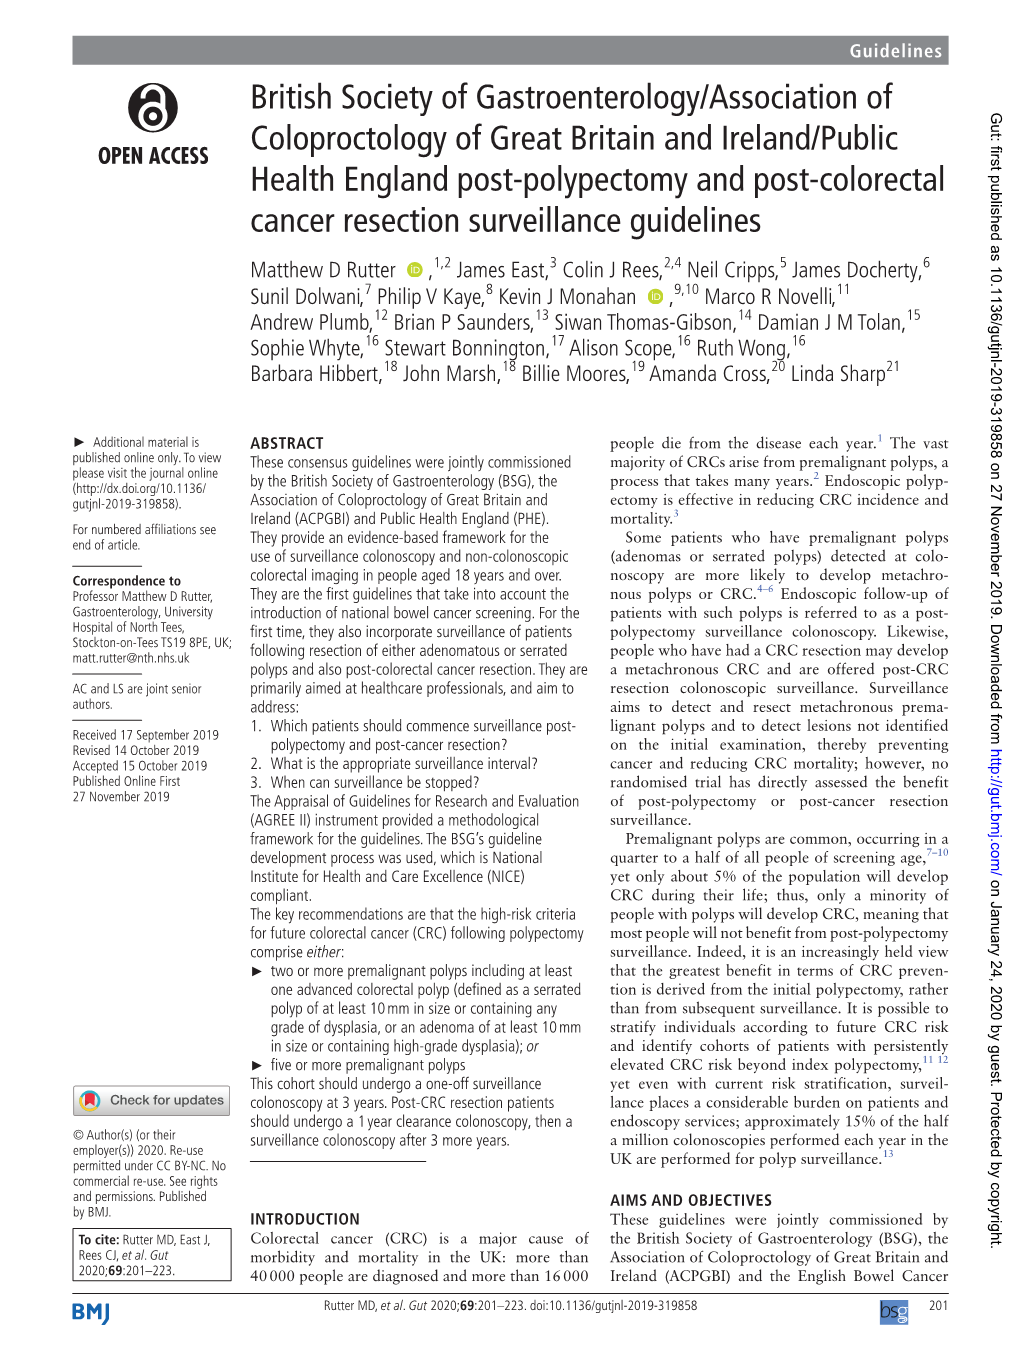 Post-Polypectomy and Post-Colorectal Cancer Resection Surveillance